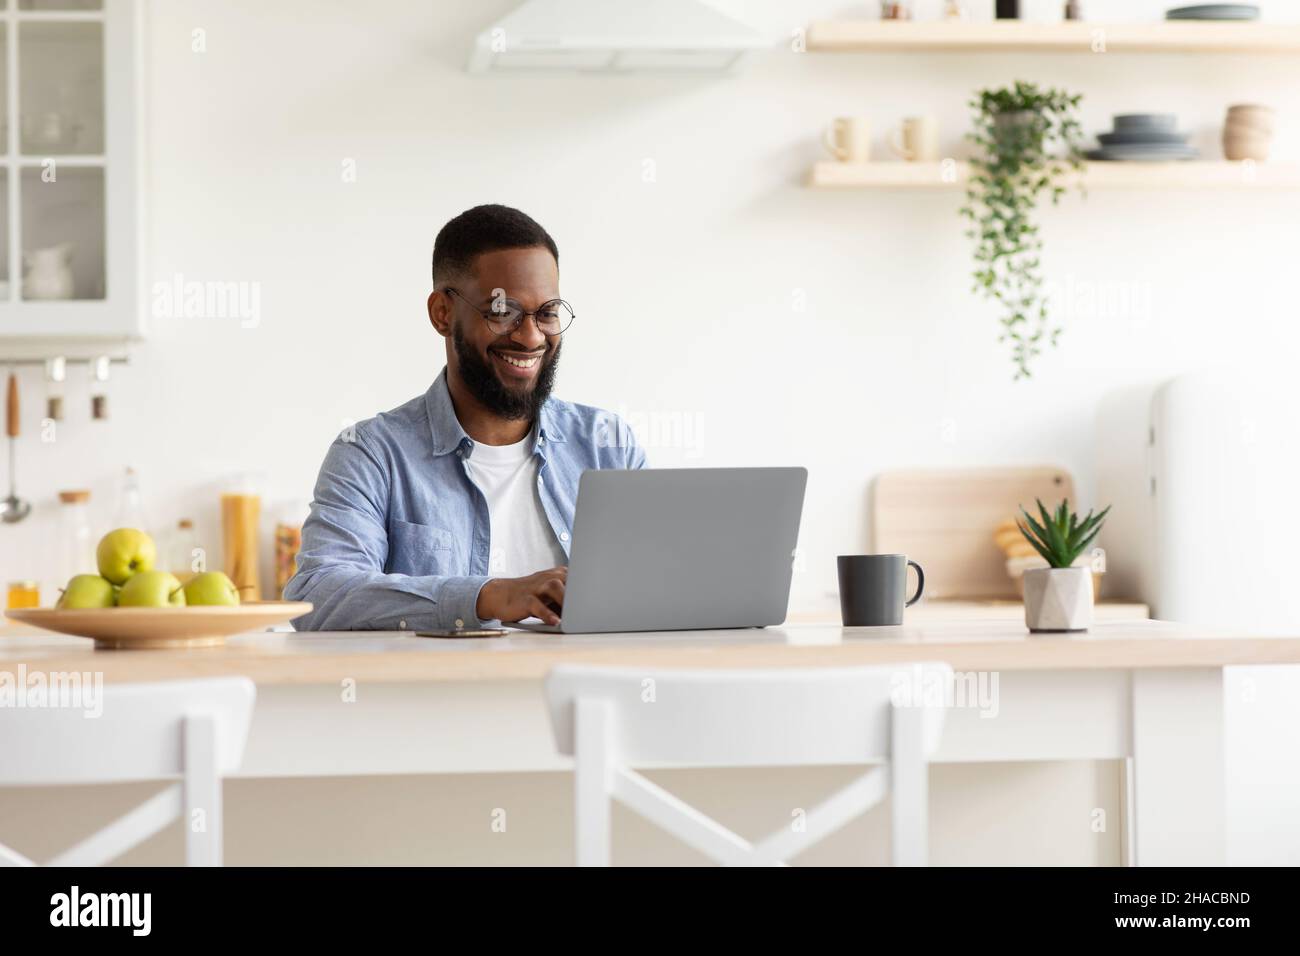 Smiling millennial african american bearded guy in glasses working on laptop in minimalist kitchen interior Stock Photo